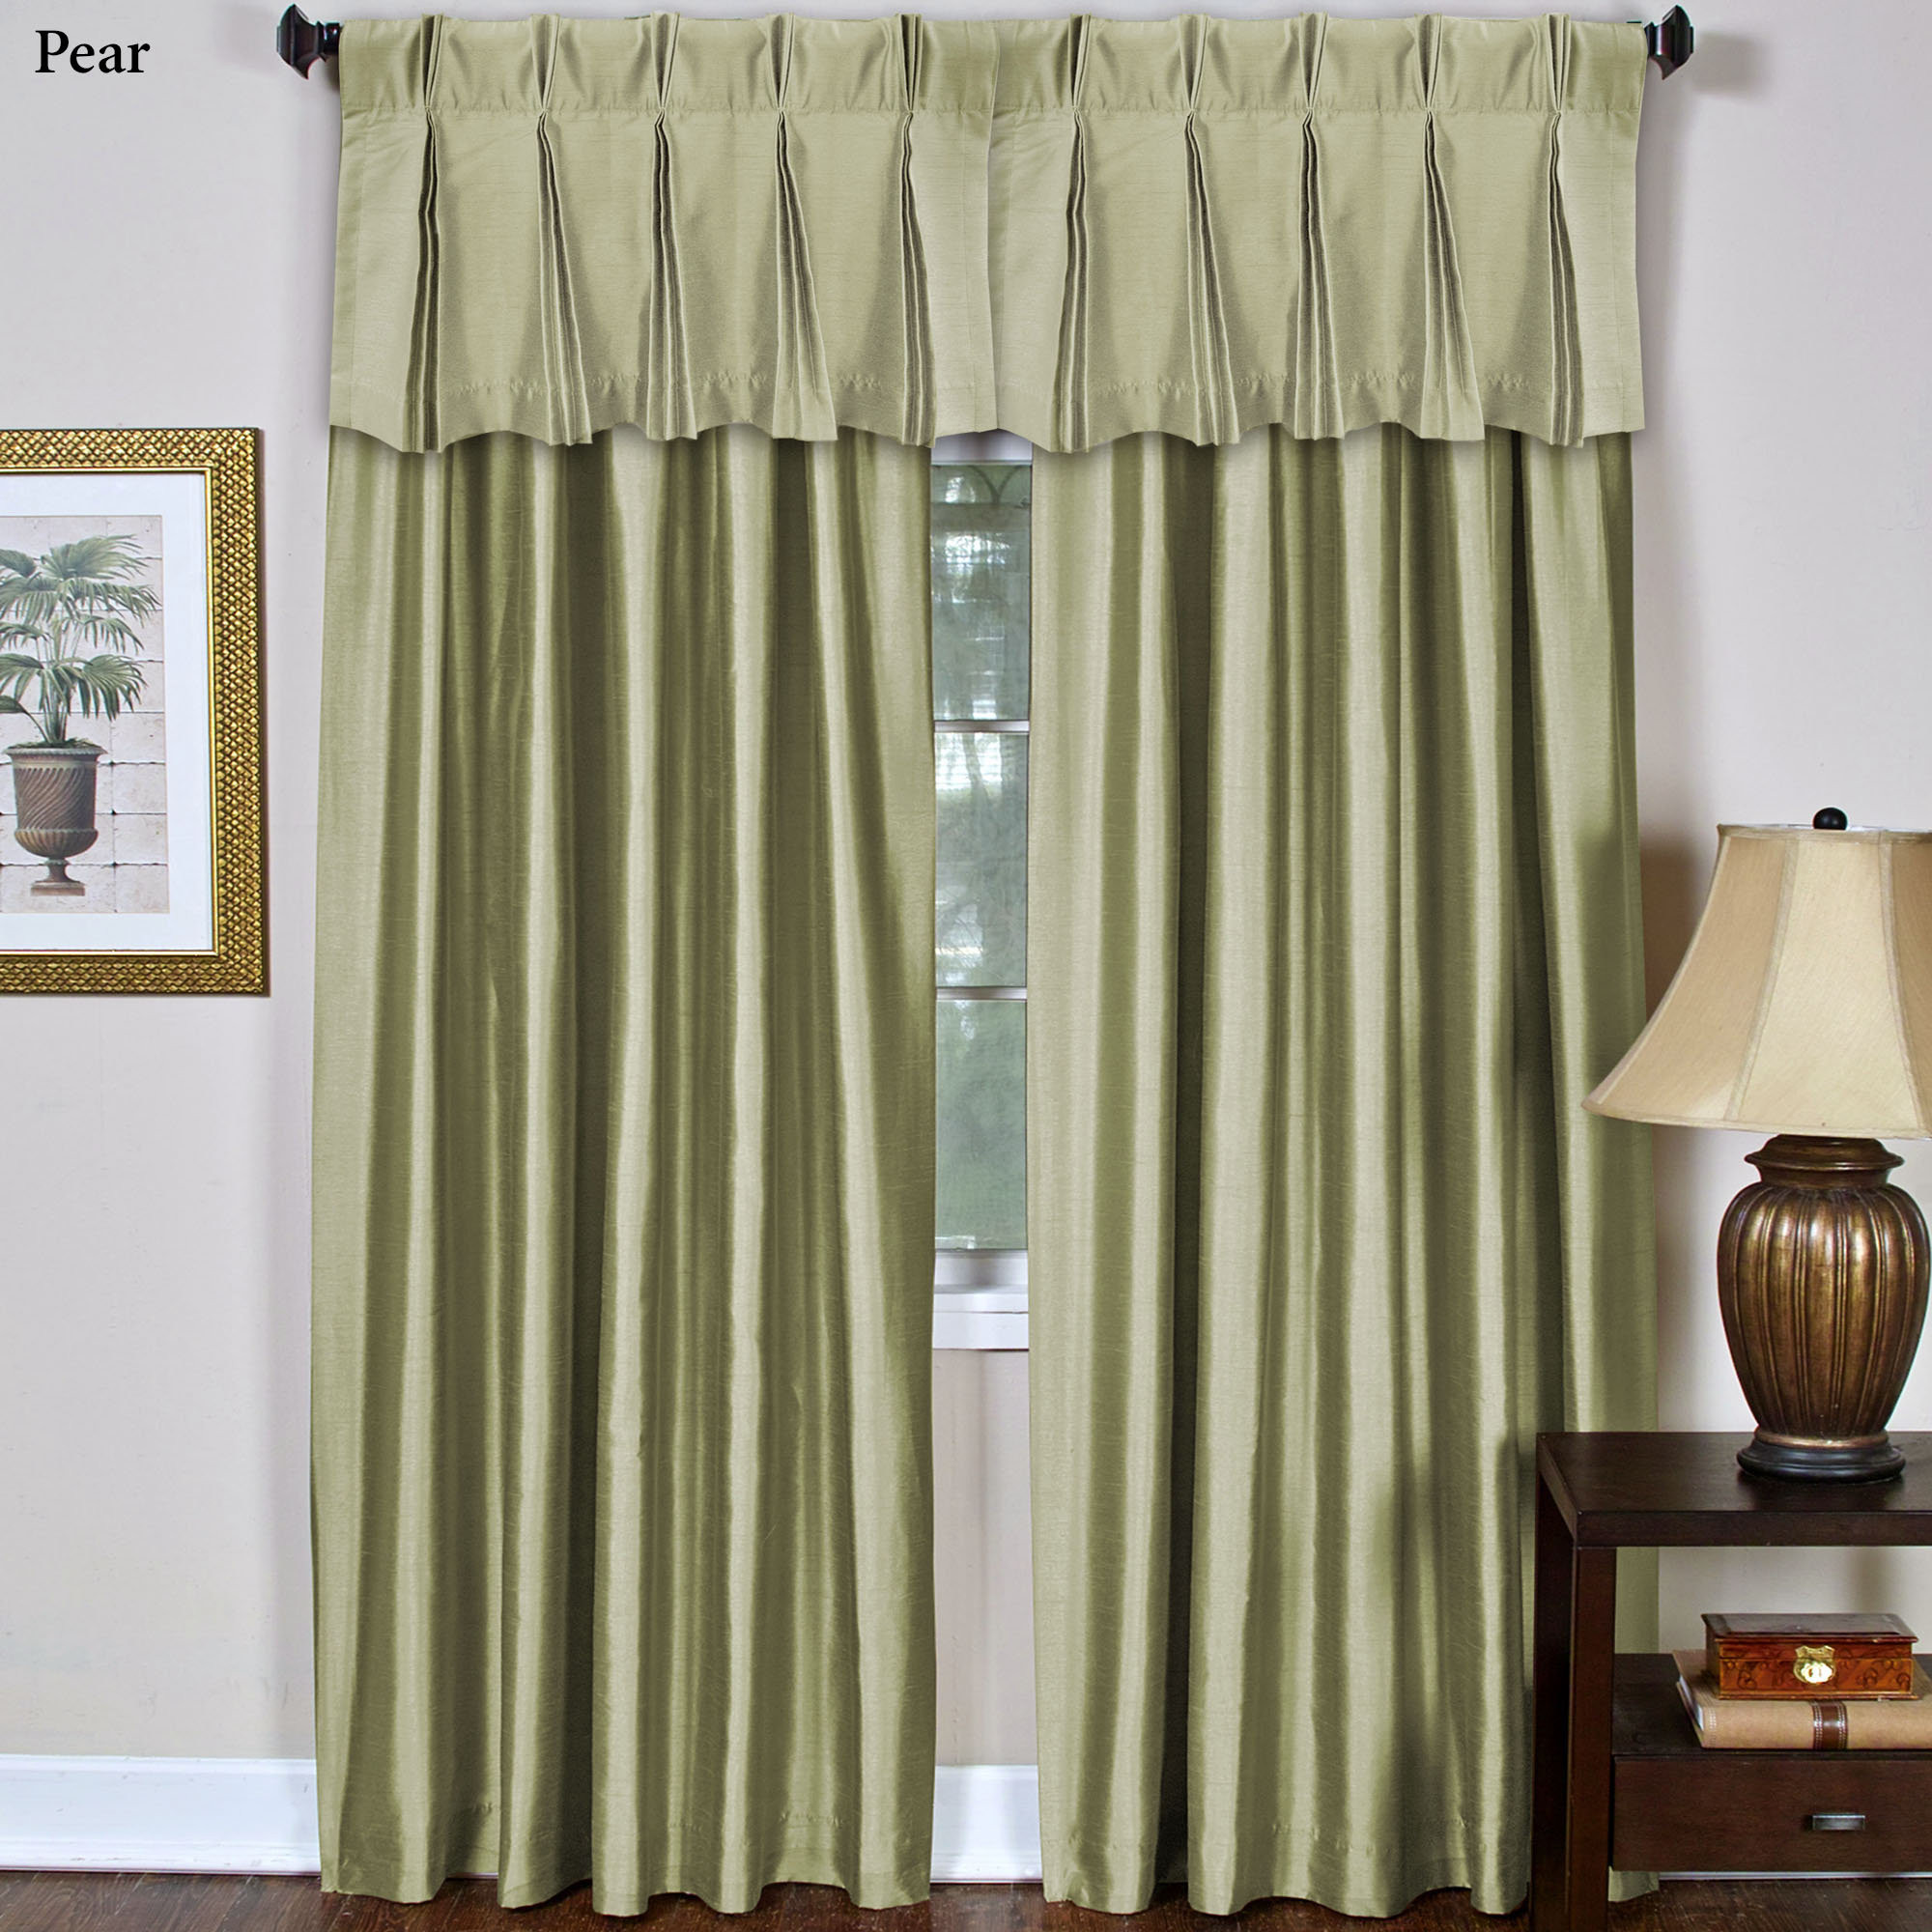 Jcpenney Living Room Curtains New Curtain Adorable Jcpenney Window Curtains For Beautiful Of Jcpenney Living Room Curtains 